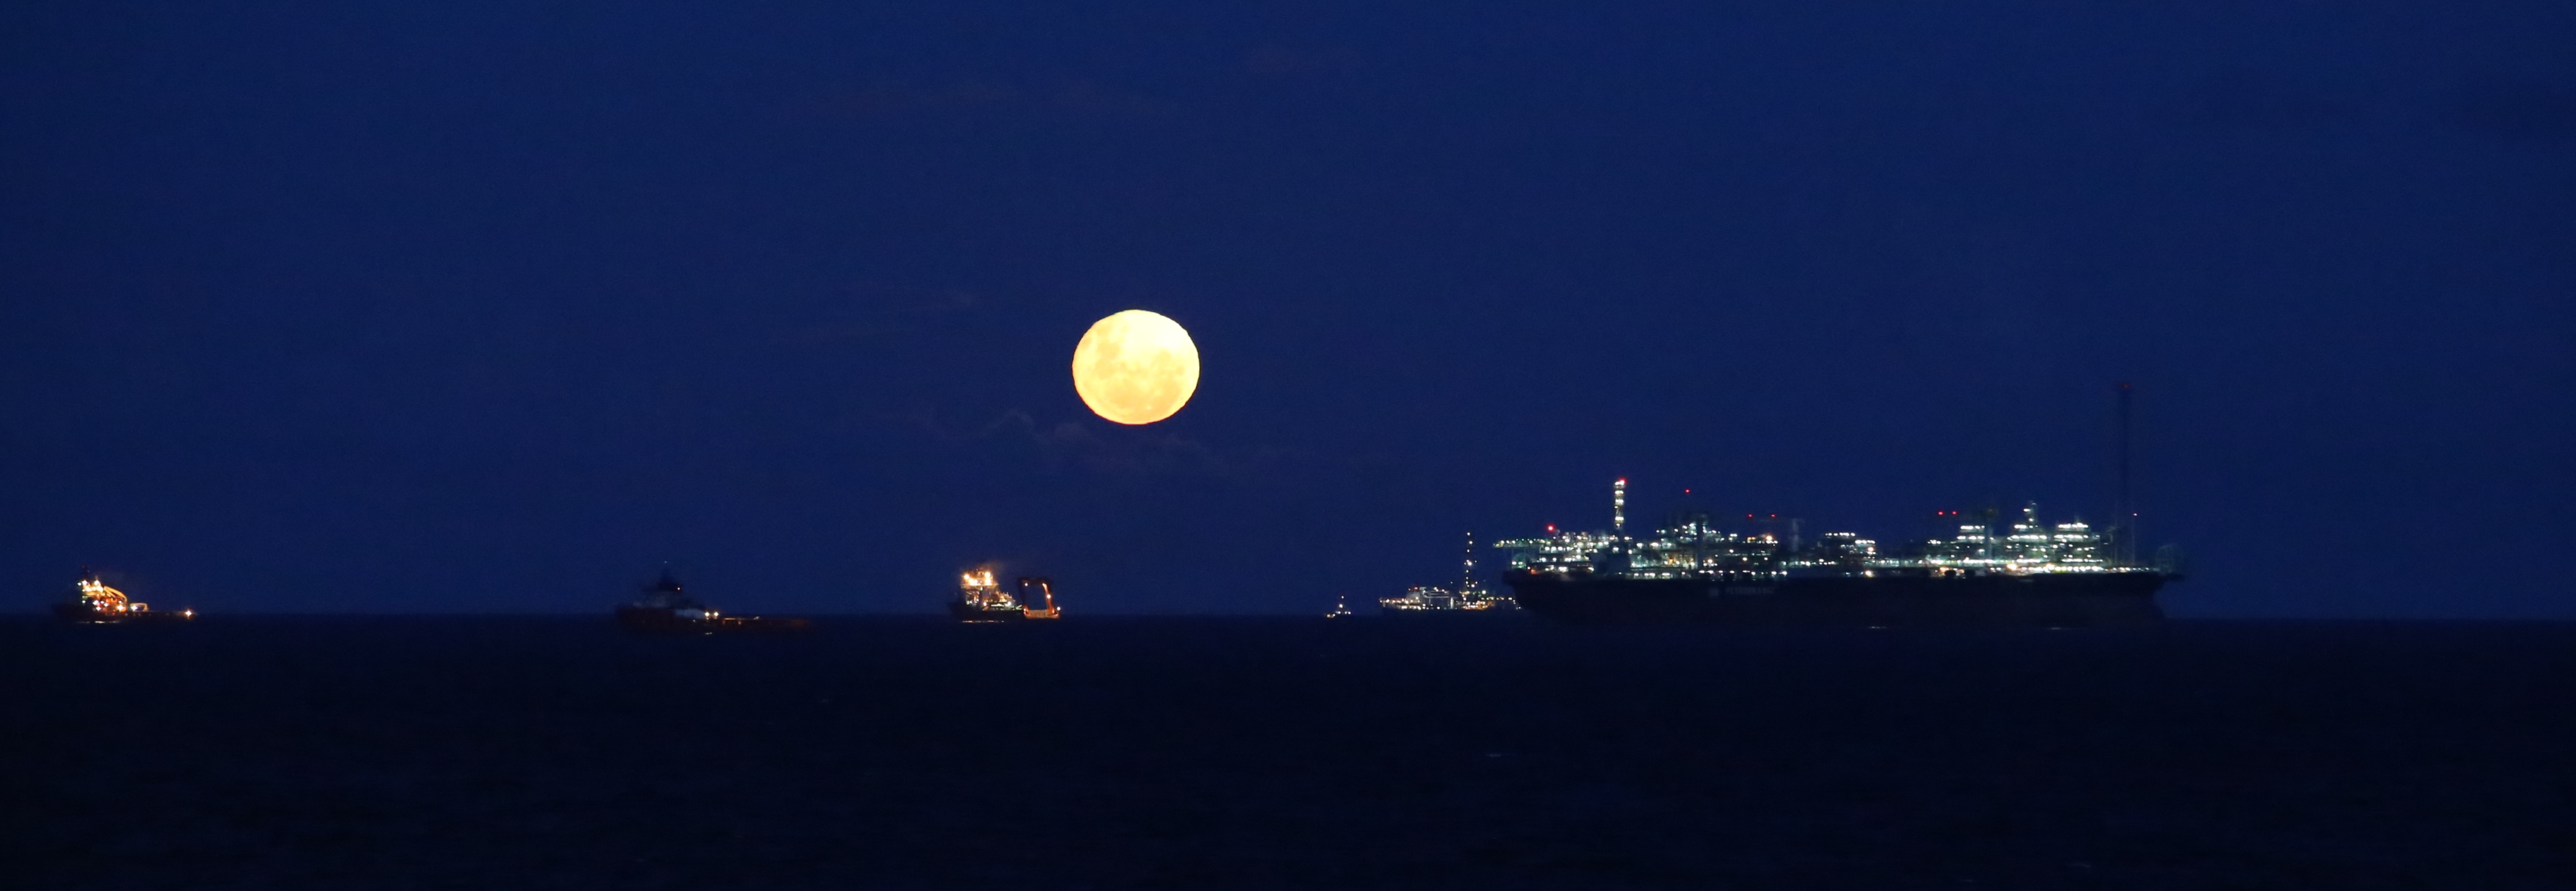 Full moon at the Campus Basin Oil Field in Brazil. 